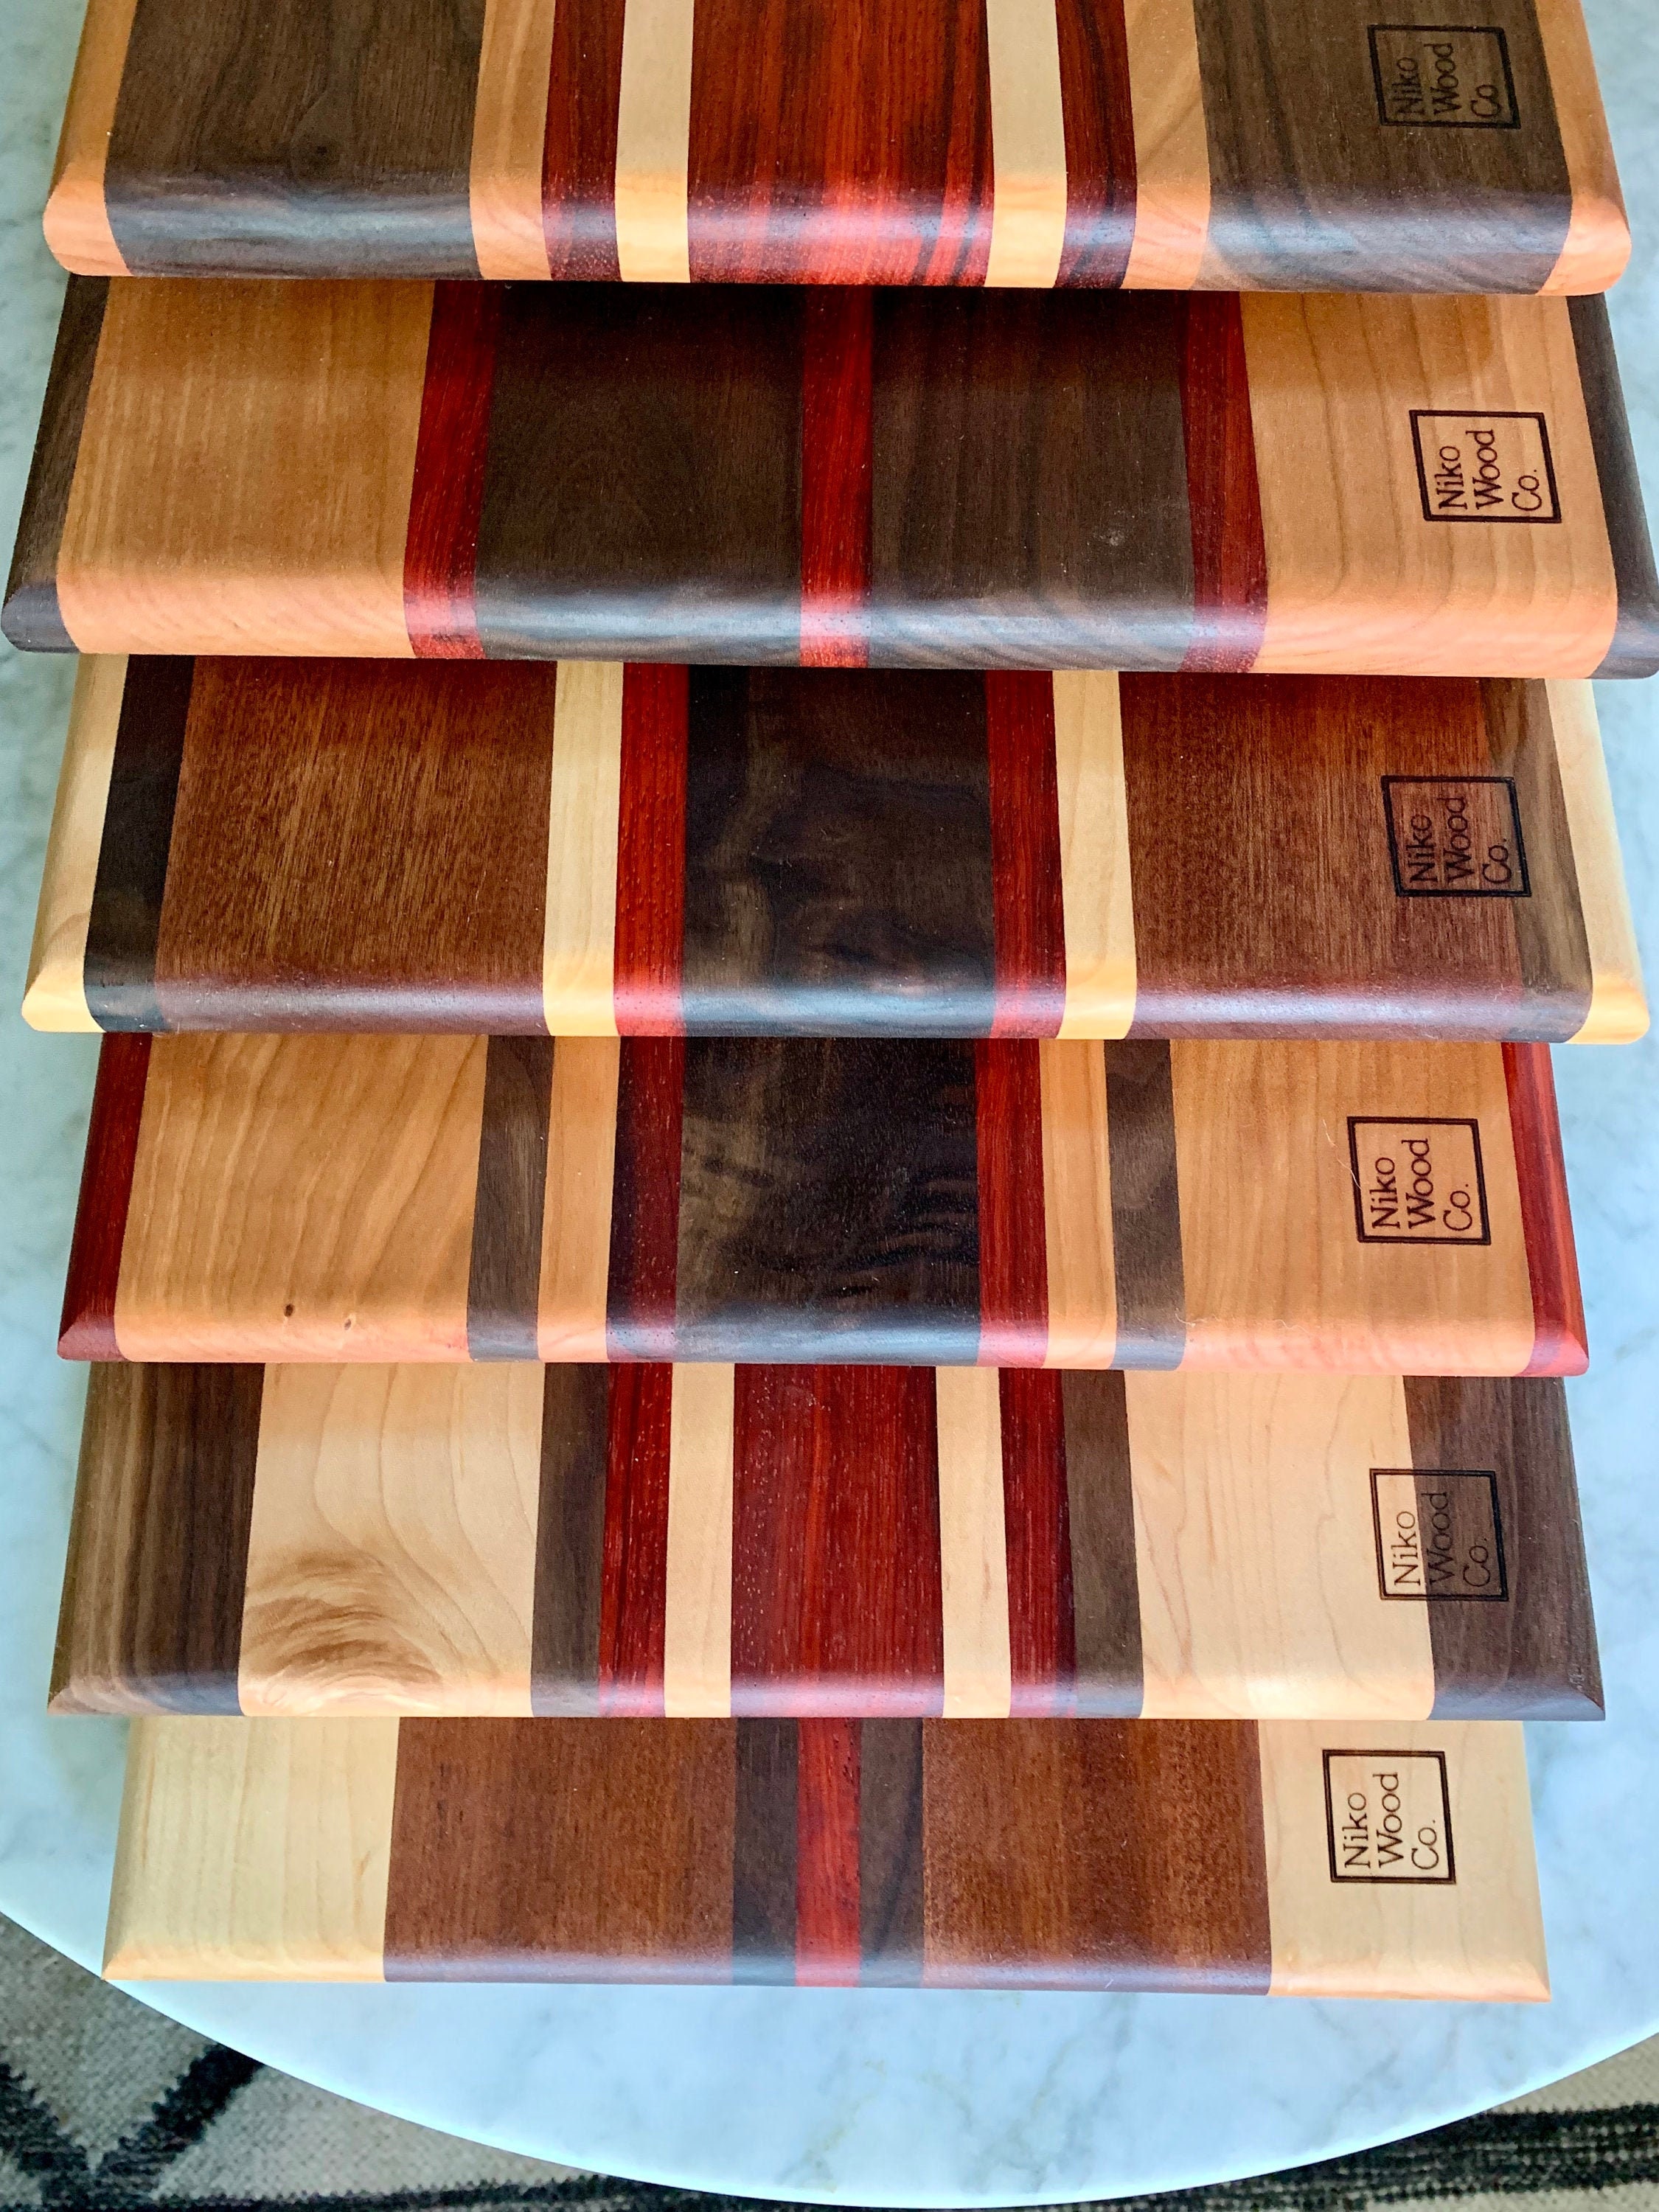 6 Cherry Lines on the Outside Cutting Board - the beehive